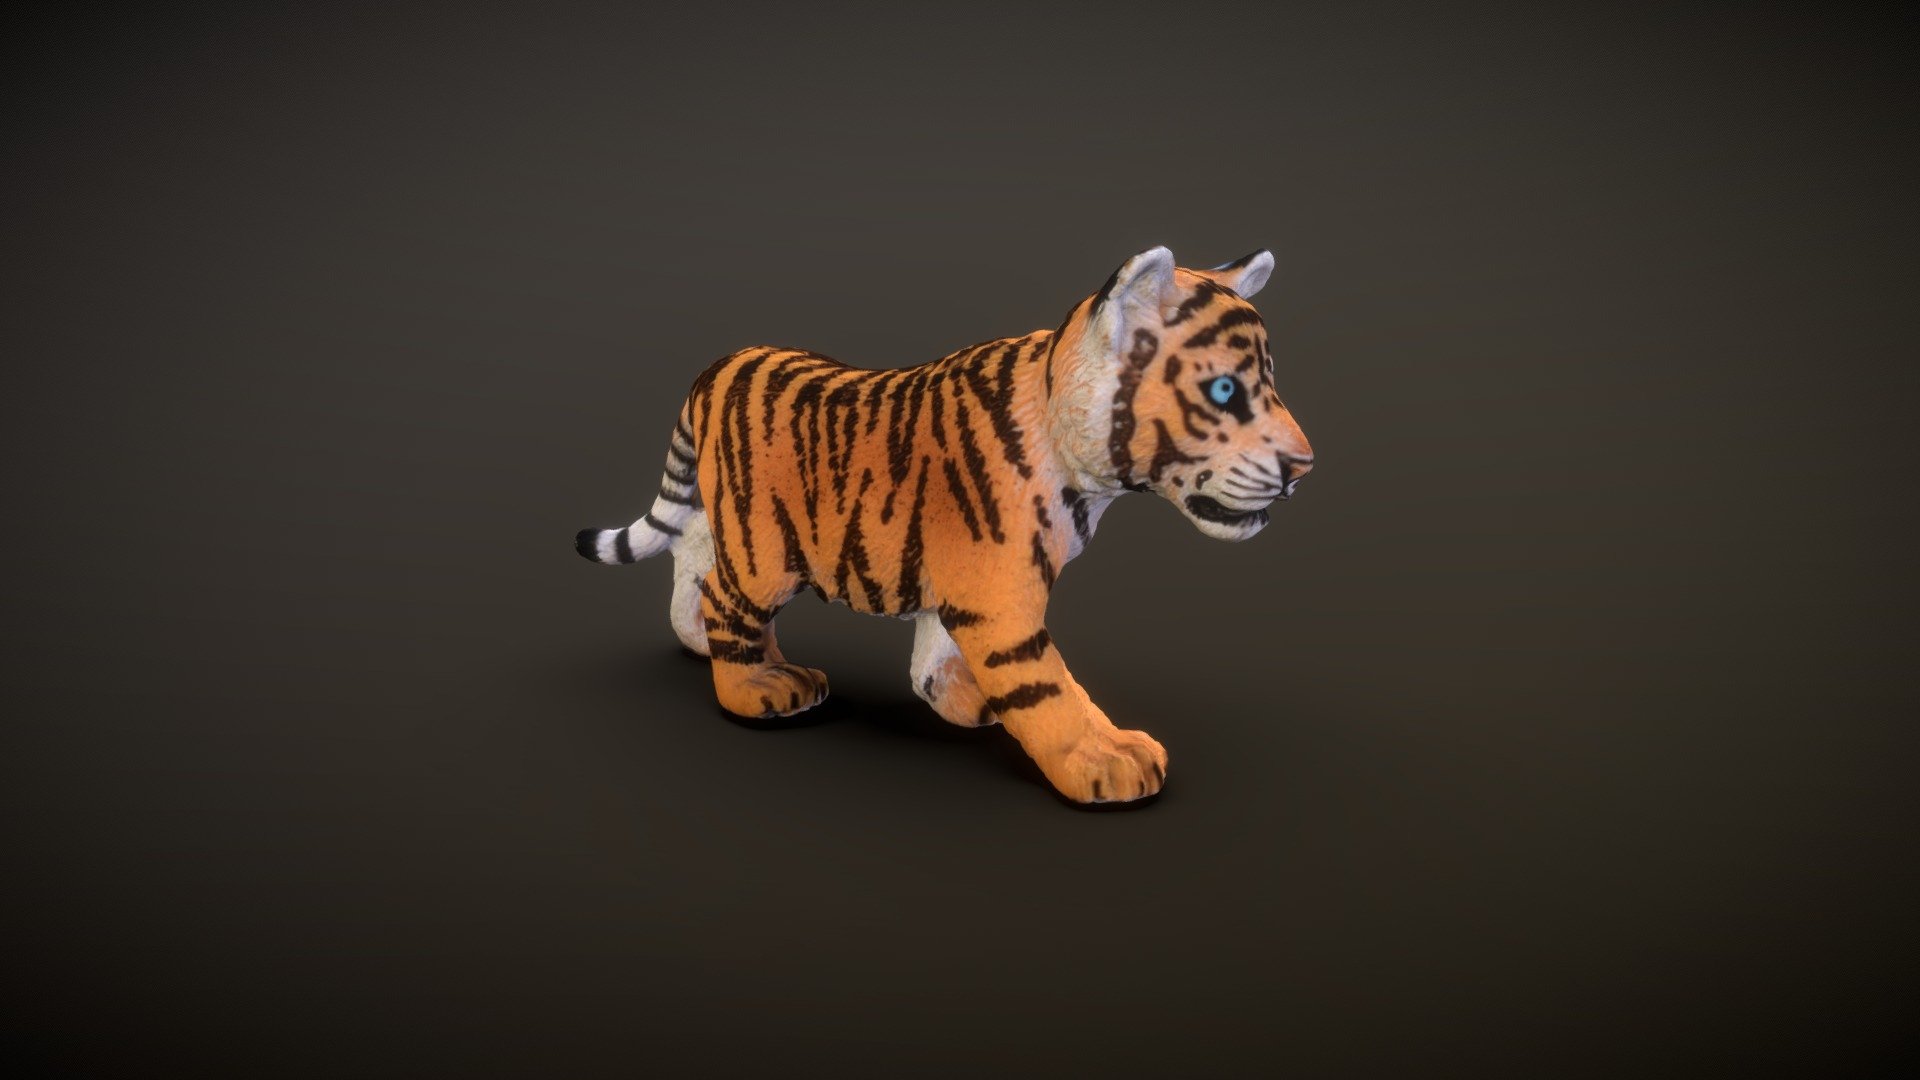 The World's Most Adorable Tiger 3D Rendering · Creative Fabrica